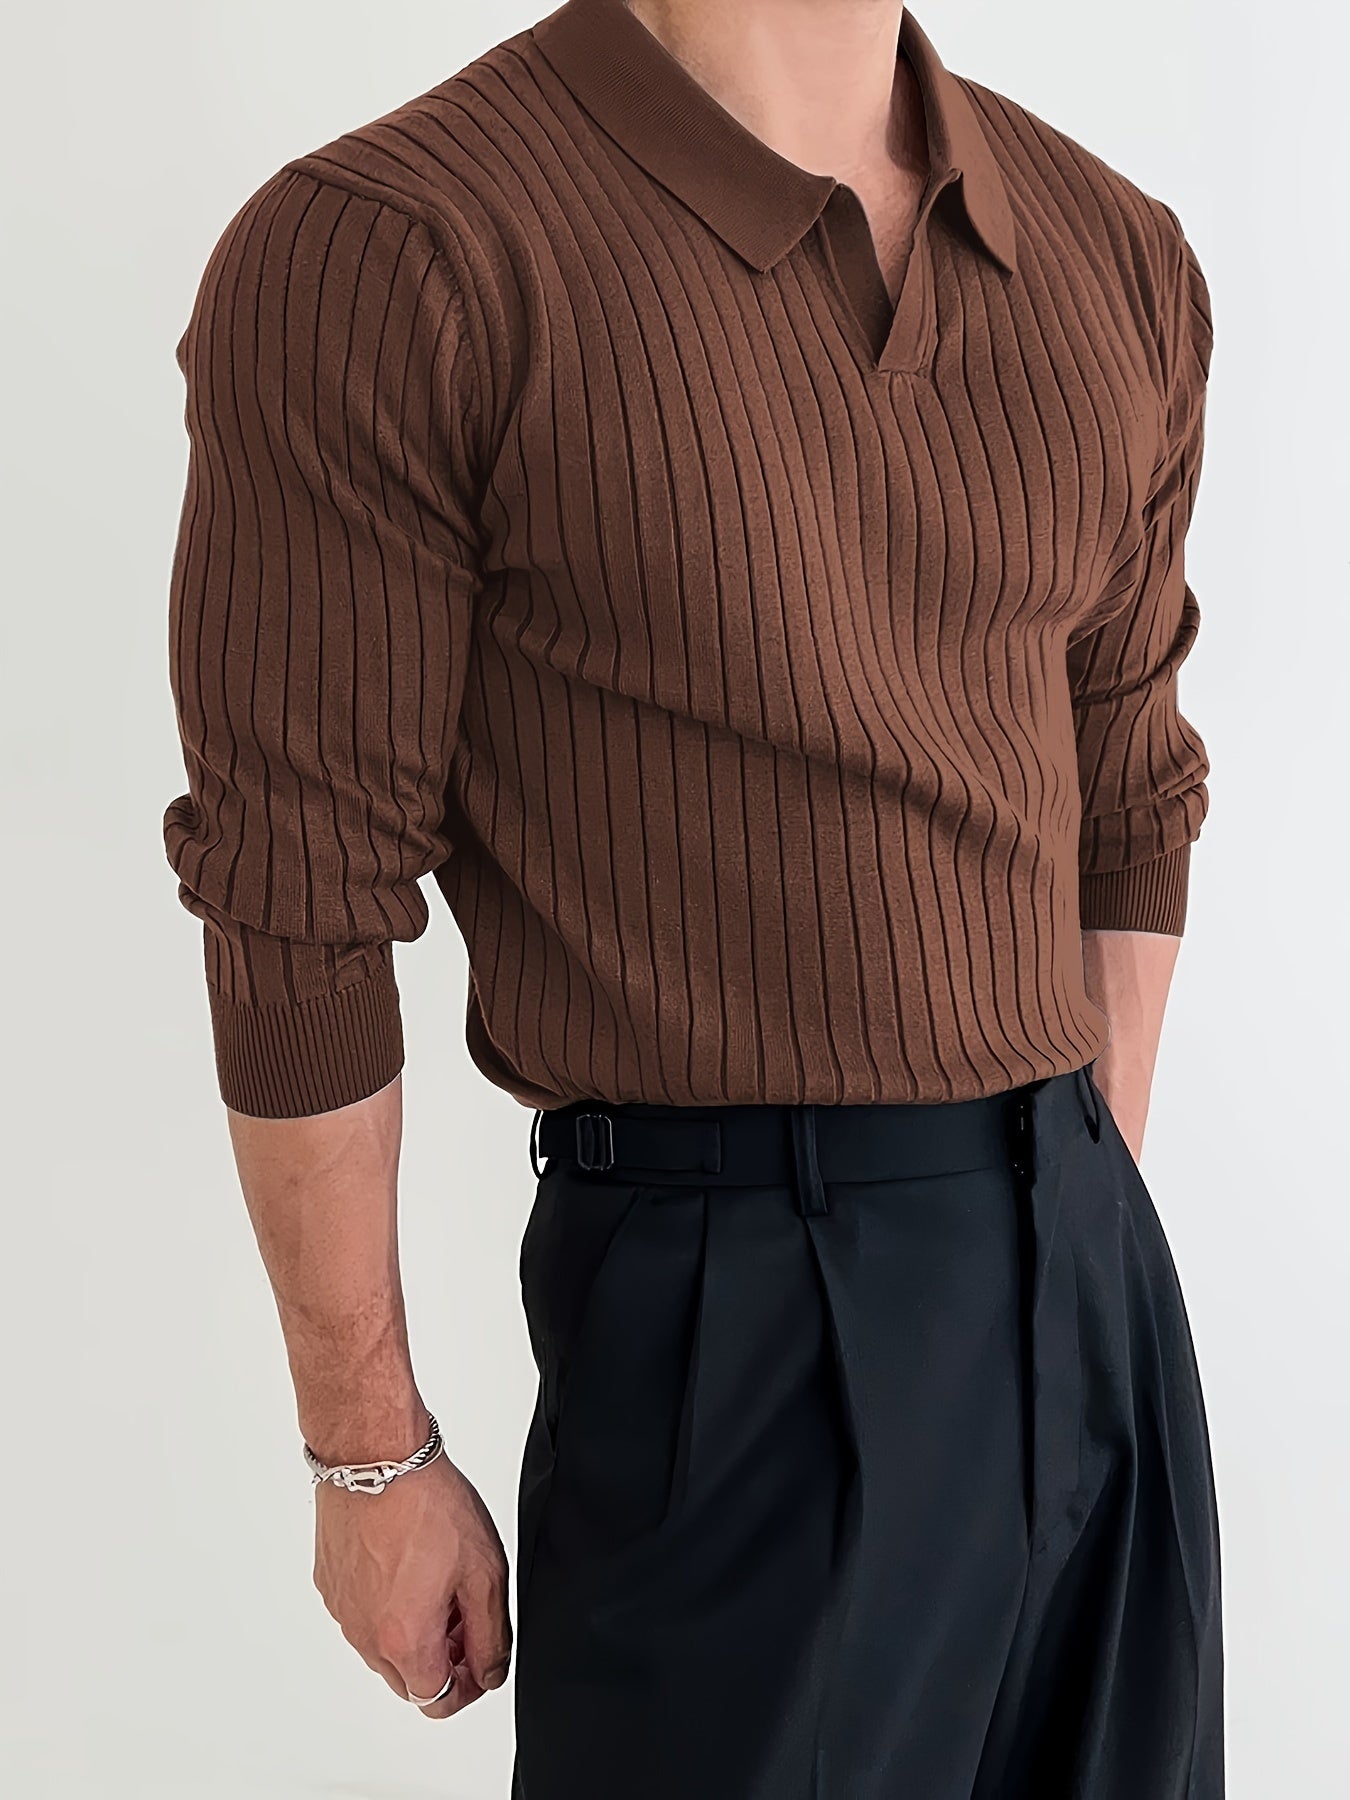 Foruwish - Solid Chic Knit Shirt, Men's Casual Lapel Slightly Stretch V-Neck Pullover Sweater For Autumn Winter